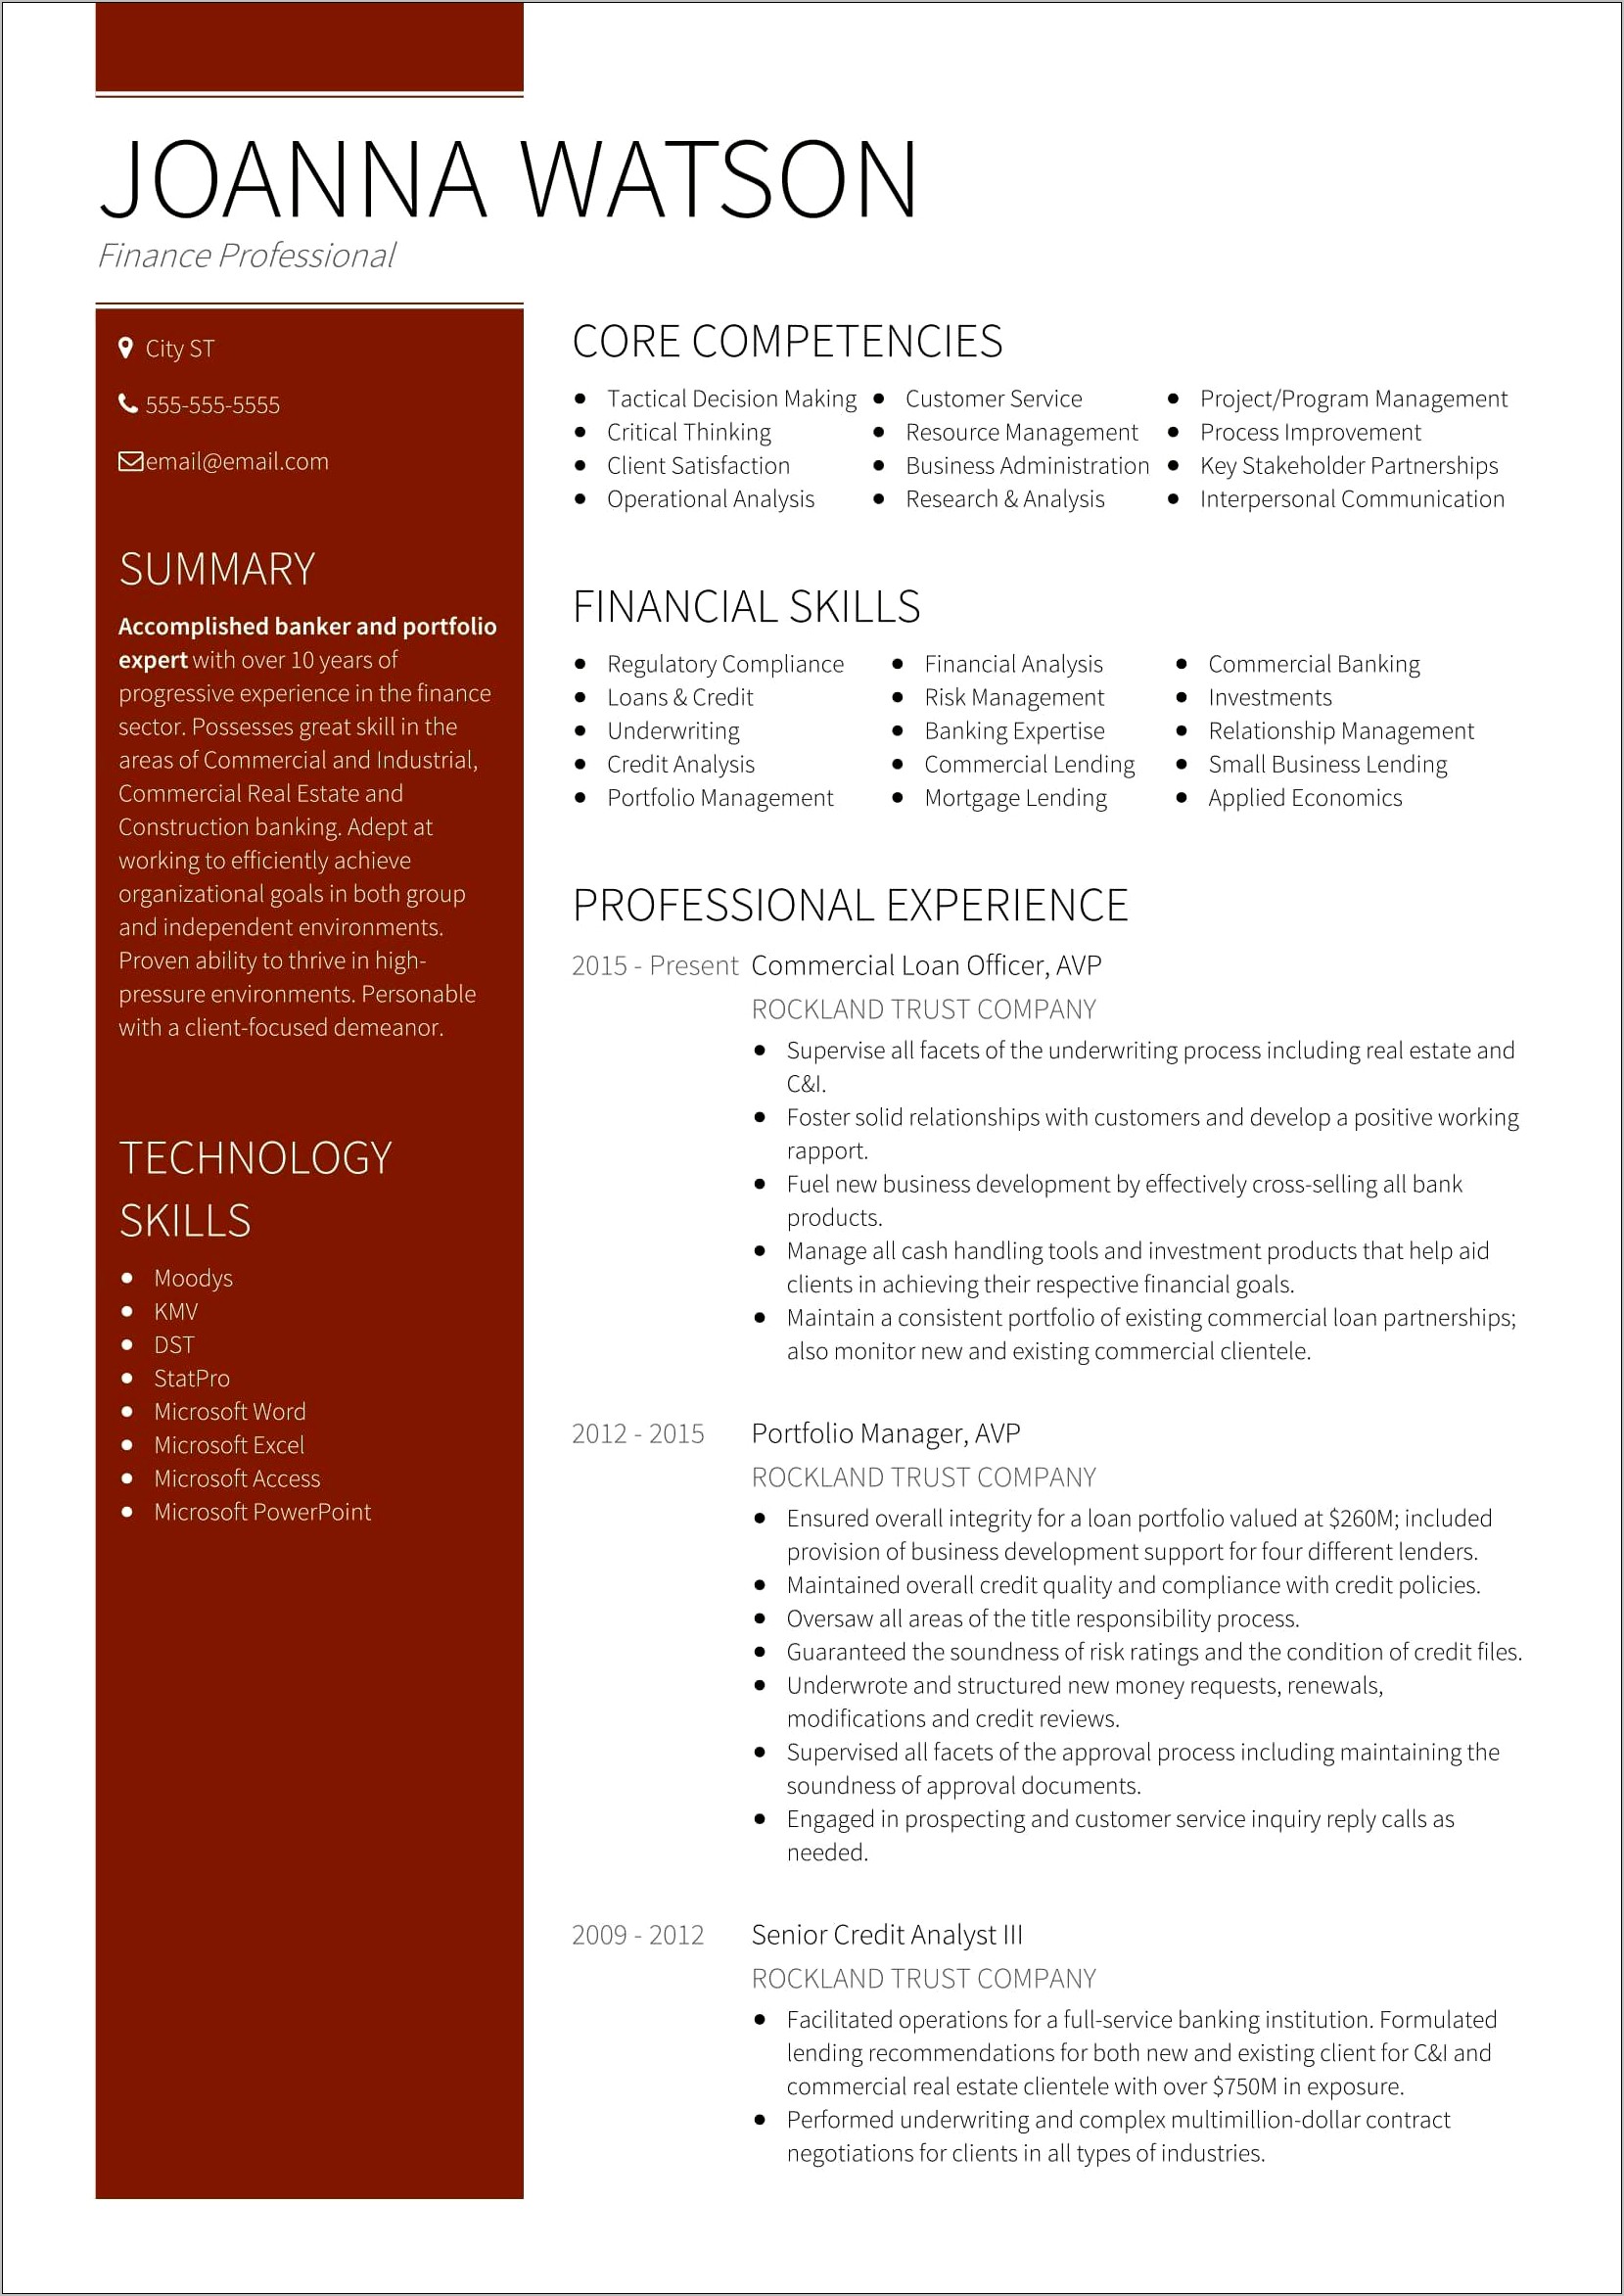 Small Business Specialist Resume Sample